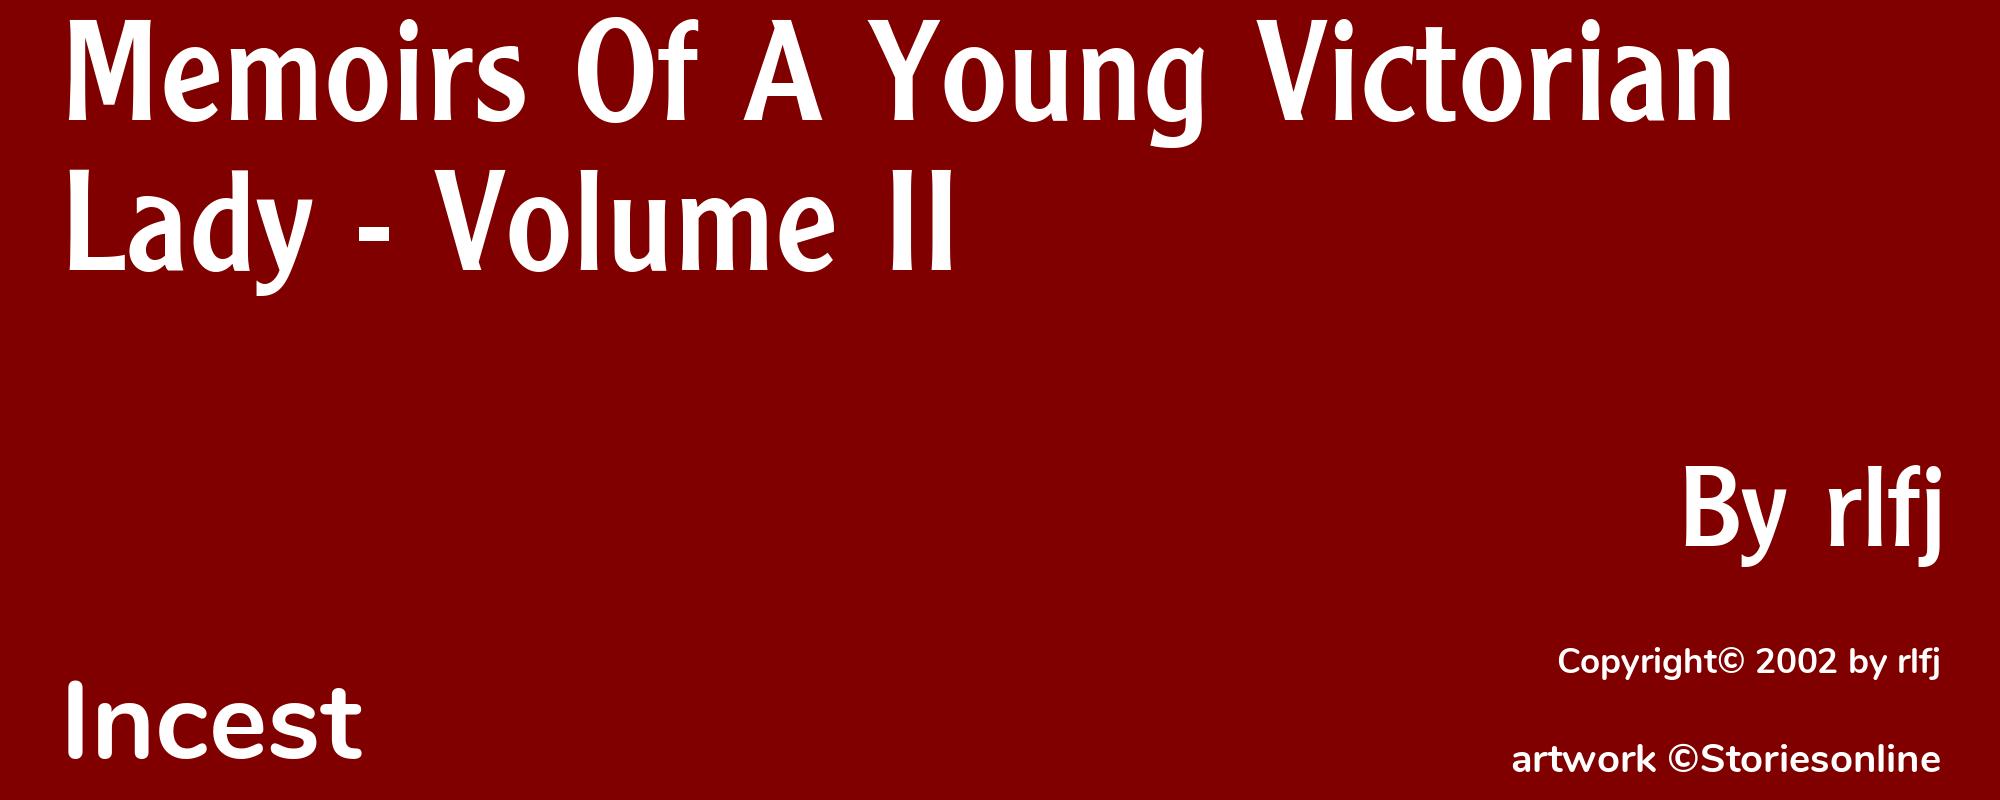 Memoirs Of A Young Victorian Lady - Volume II - Cover